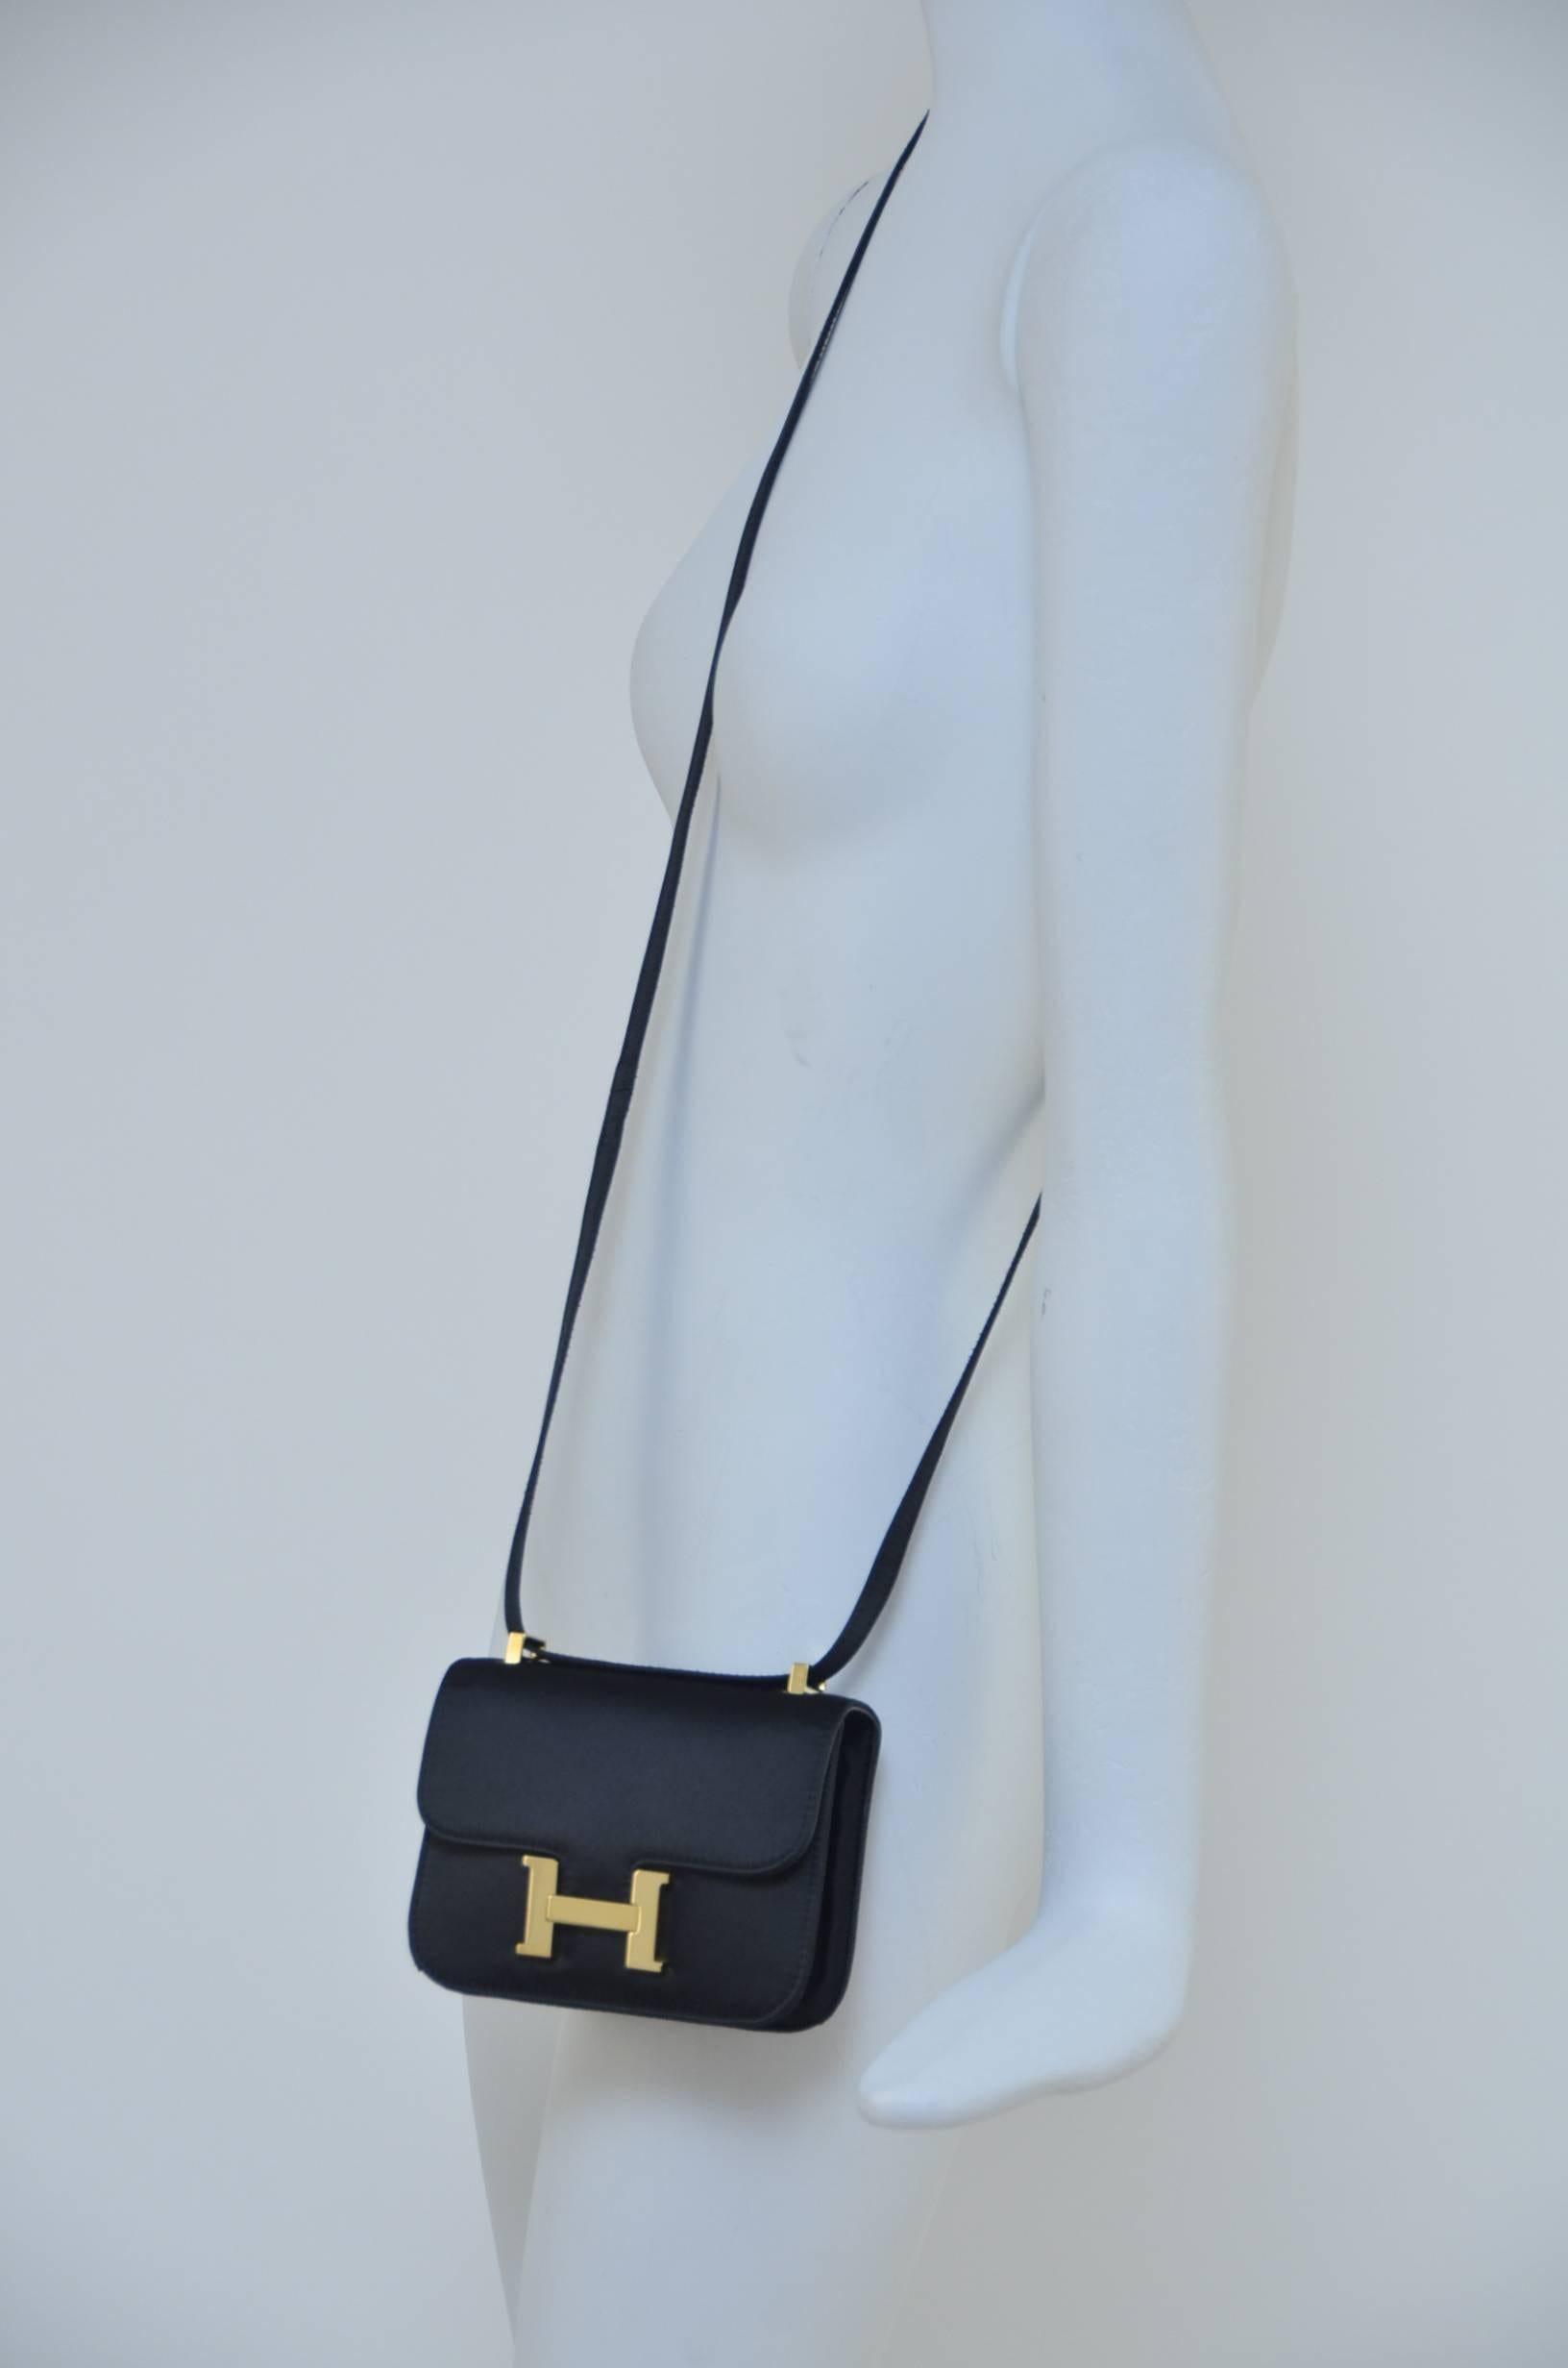 Hermès Satin Micro Mini Constance bag .
Super rare and impossible to find .
This is definitely a statement bag that could be used day or night  with unique strap that could be  used cross body or doubled for evening night out.
Gold tone